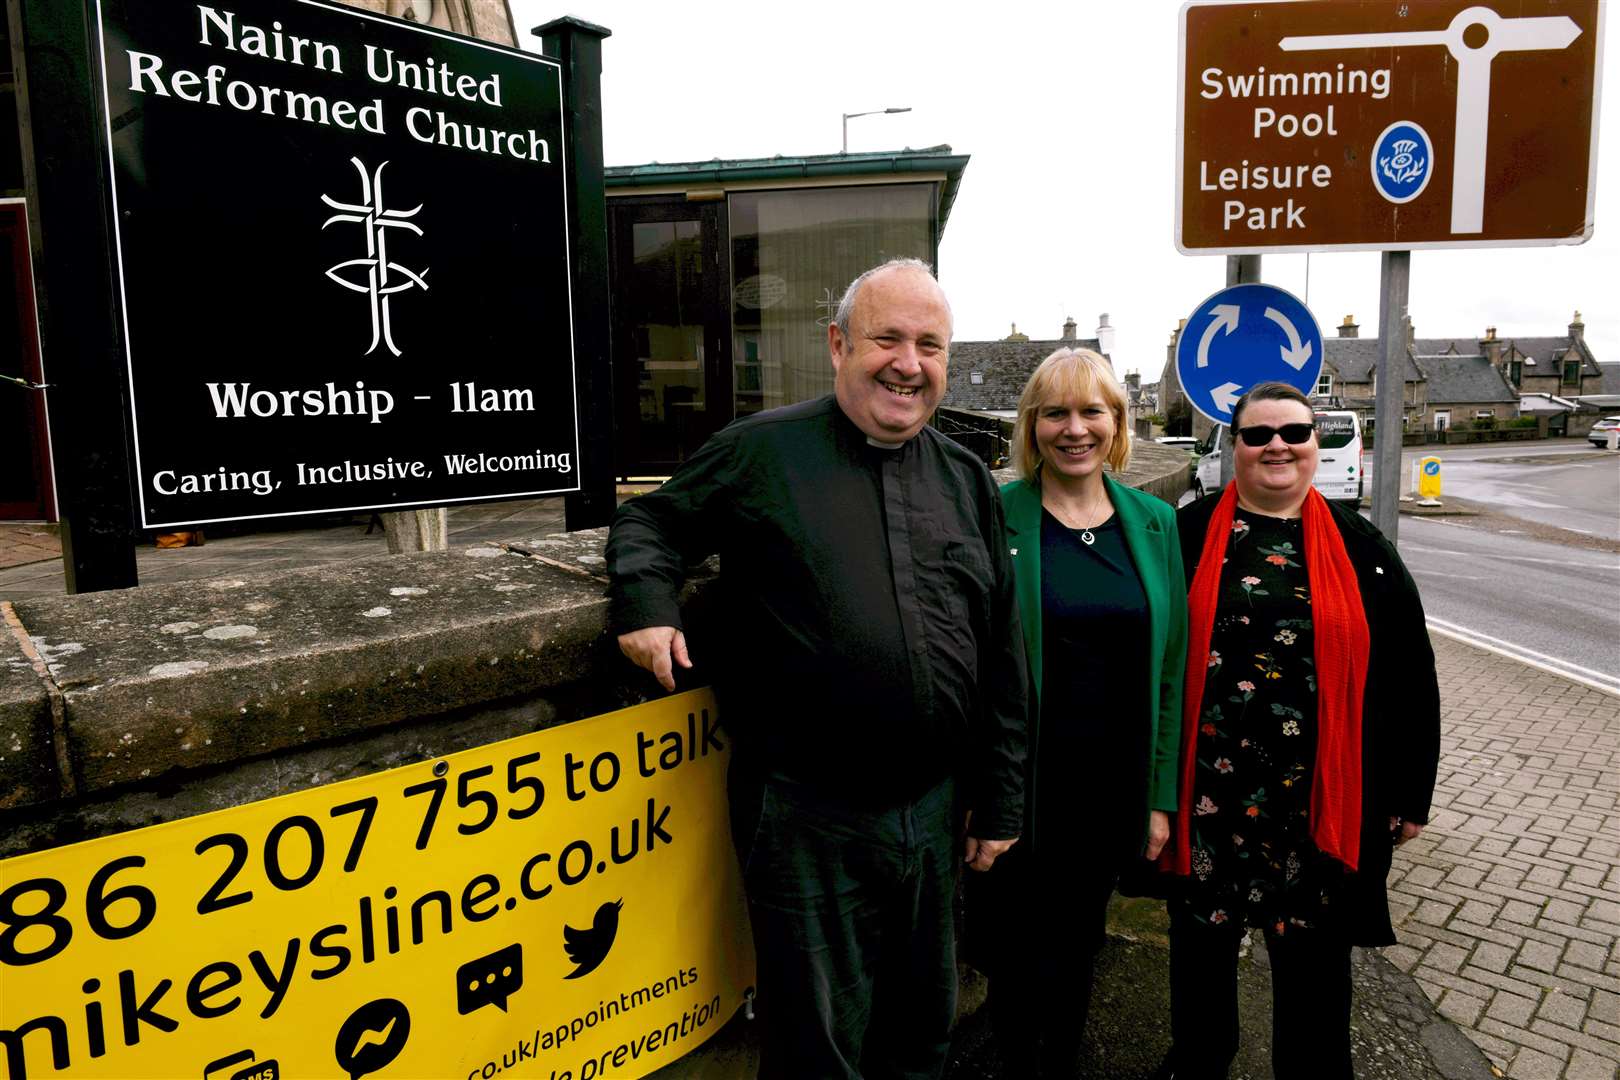 Rev Steven Manders, Emily Stokes, Mikeysline Chief Executive and Linda Birnie, Mikeysline Operations Manager. Picture: James Mackenzie.